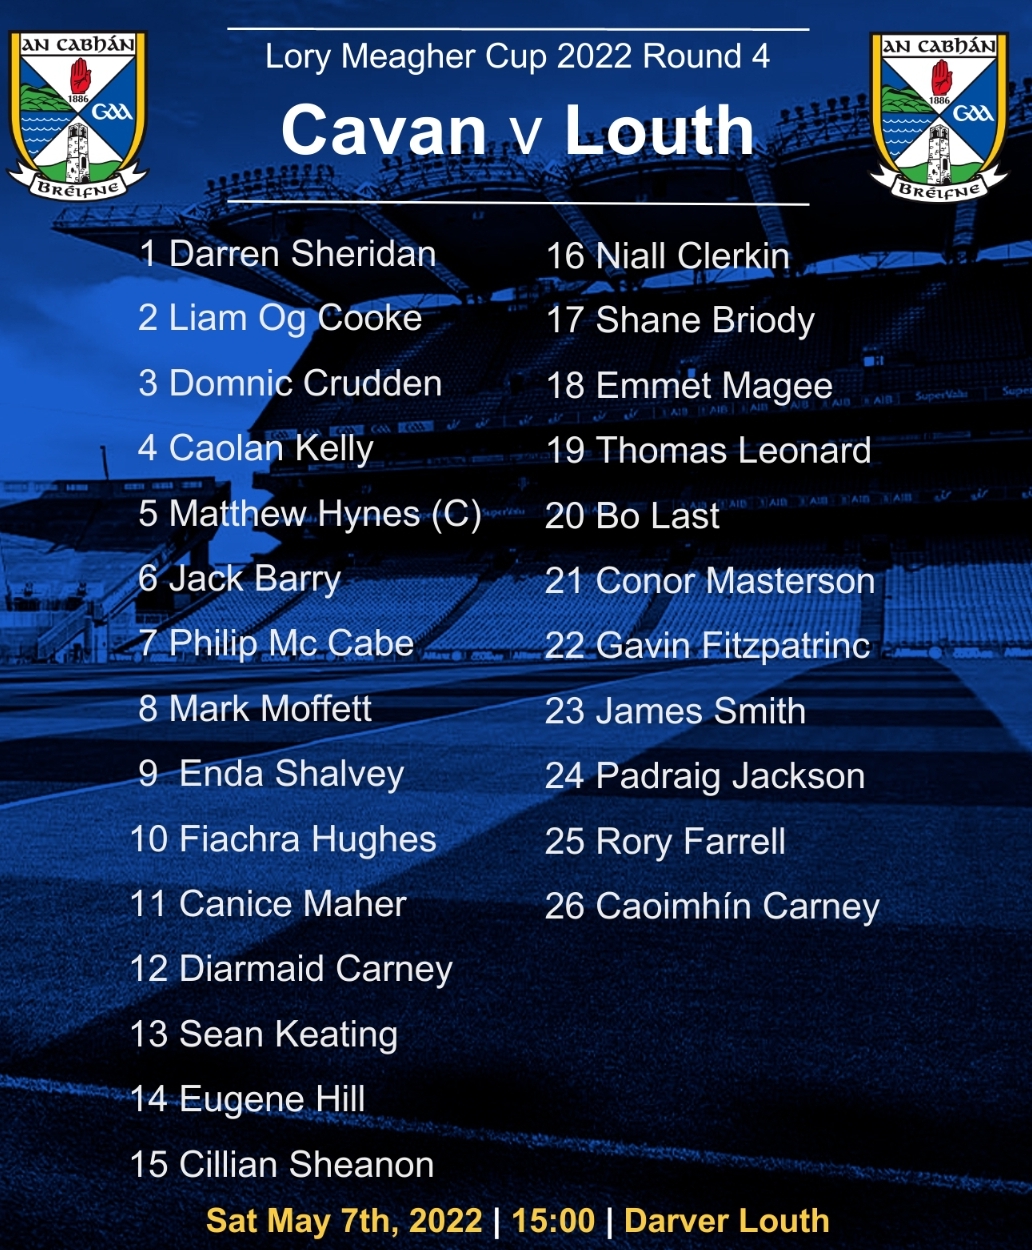 Cavan Hurling Team named ahead of  Lory Meagher Cup Round 4